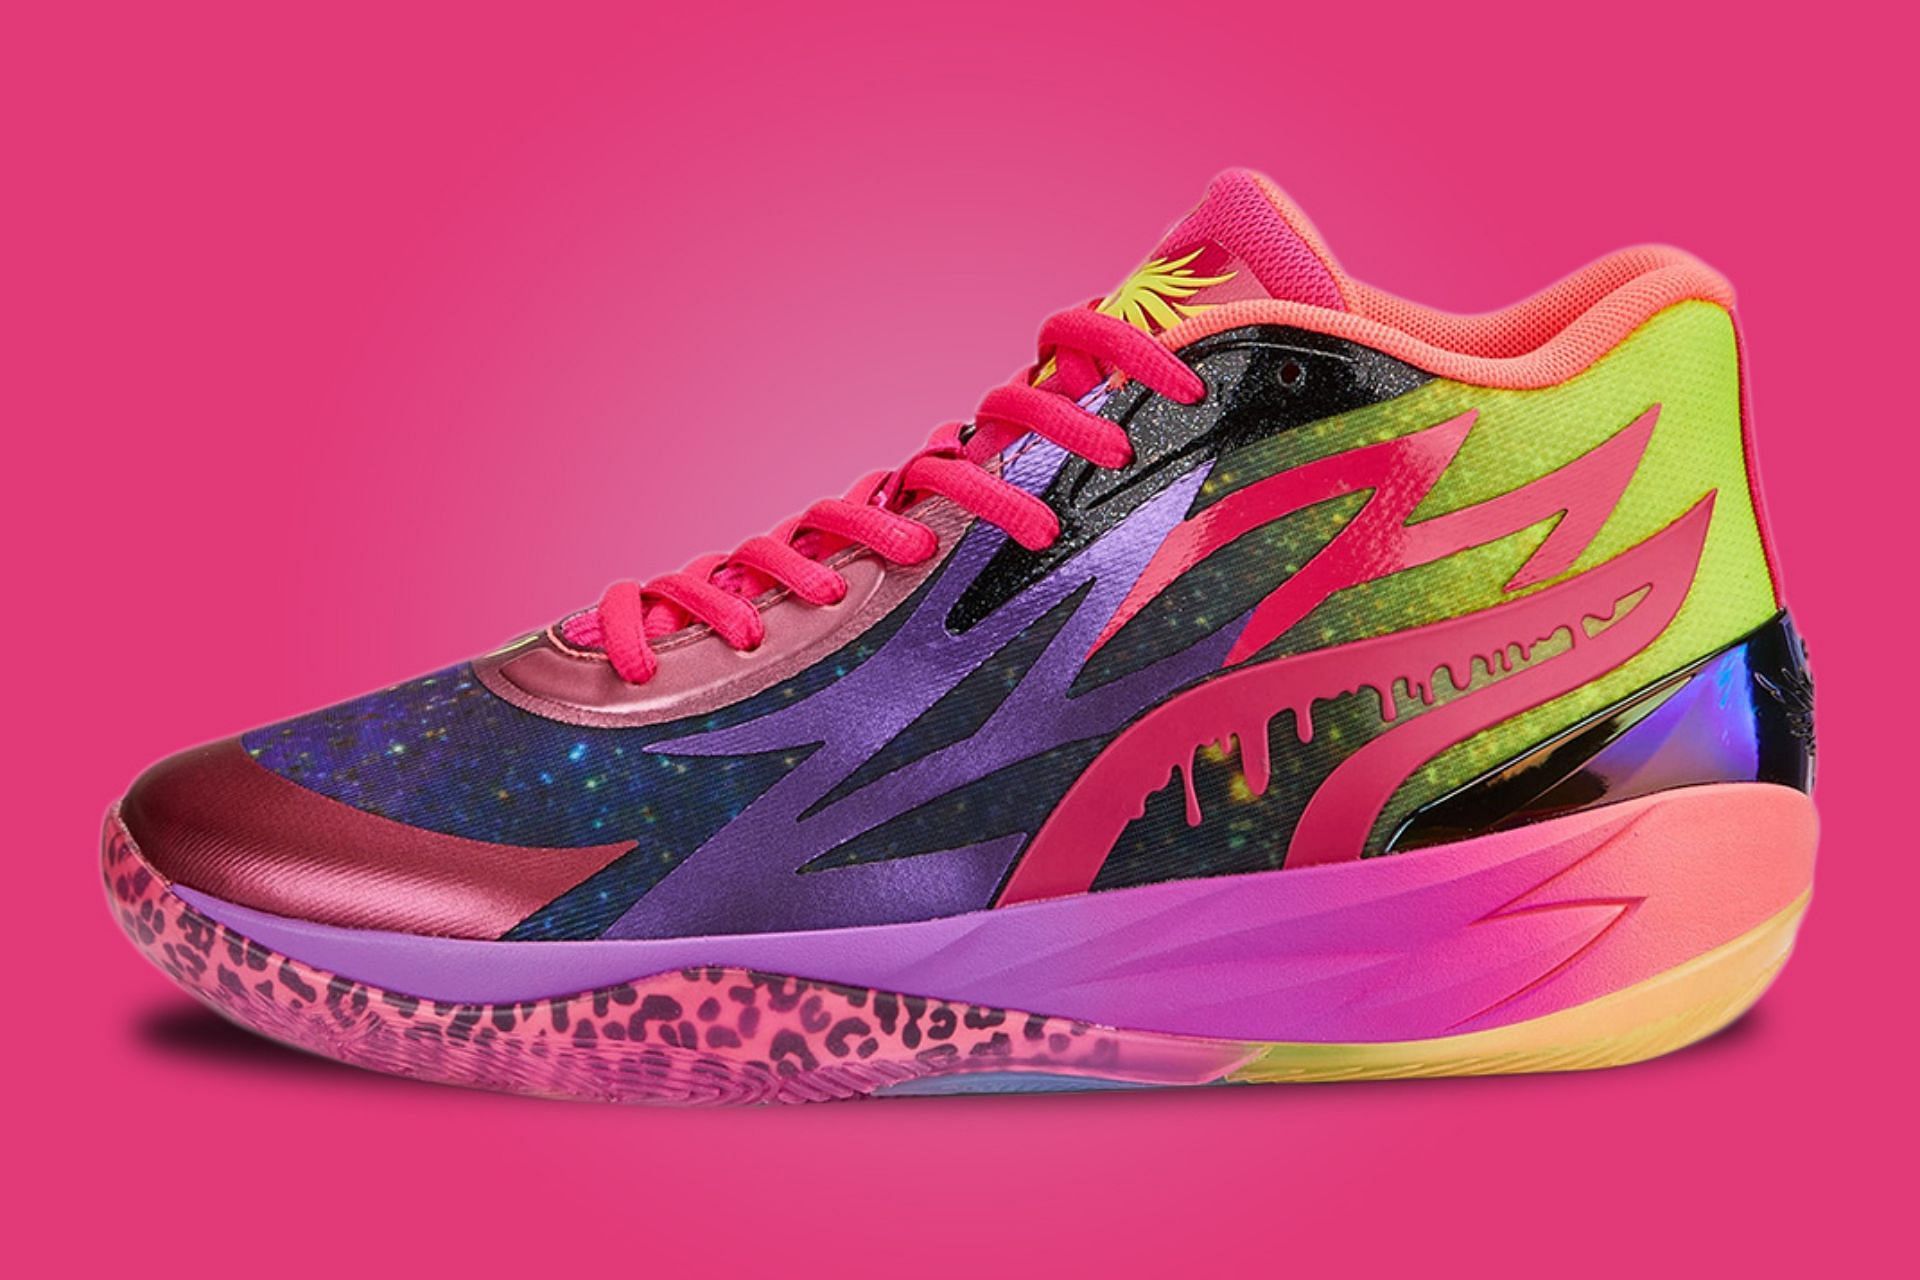 Puma: LaMelo Ball x Puma  “Galaxy” shoes: Where to buy, price, and  more details explored